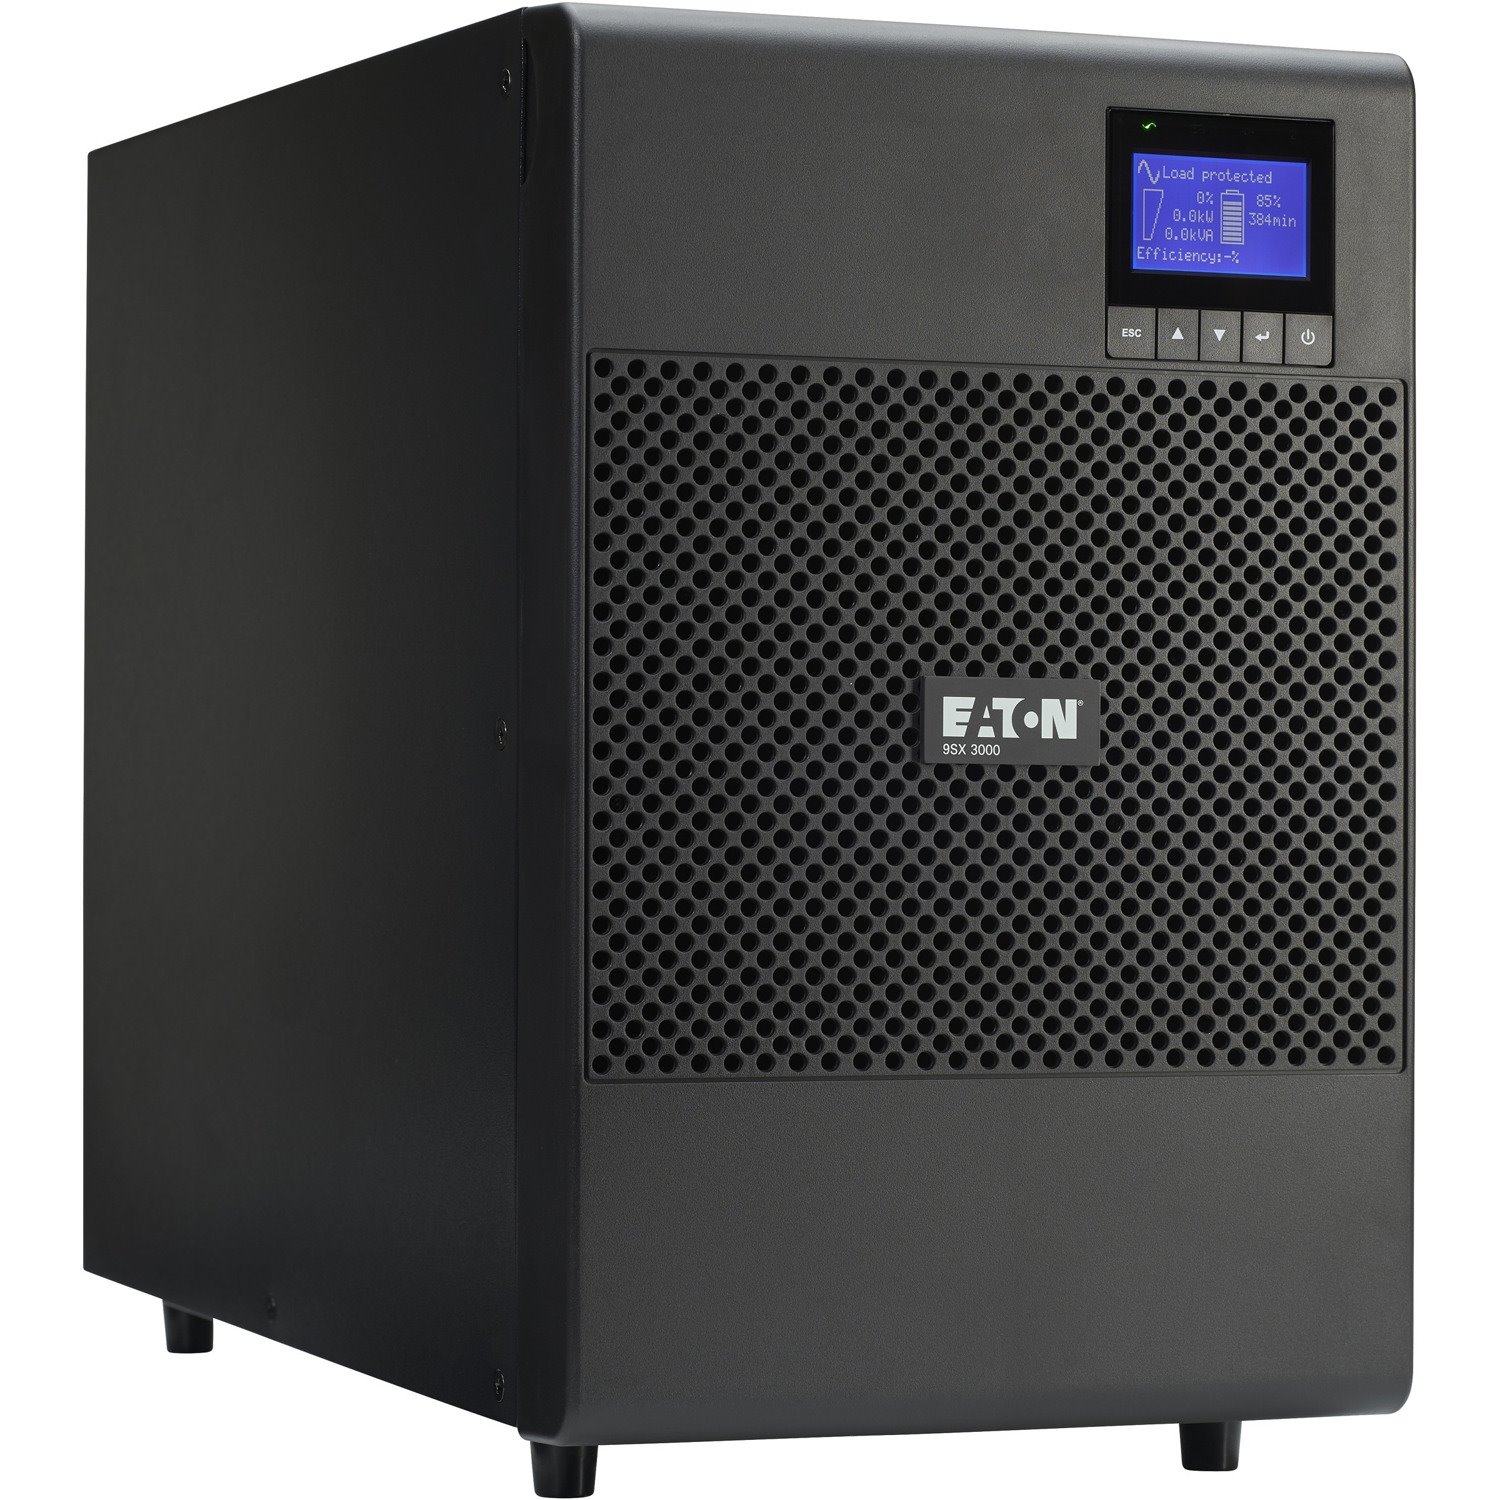 Eaton 9SX 3000VA 2700W 120V Online Double-Conversion UPS - Hardwired In/Out, Cybersecure Network Card Option, Extended Run, Tower - Battery Backup